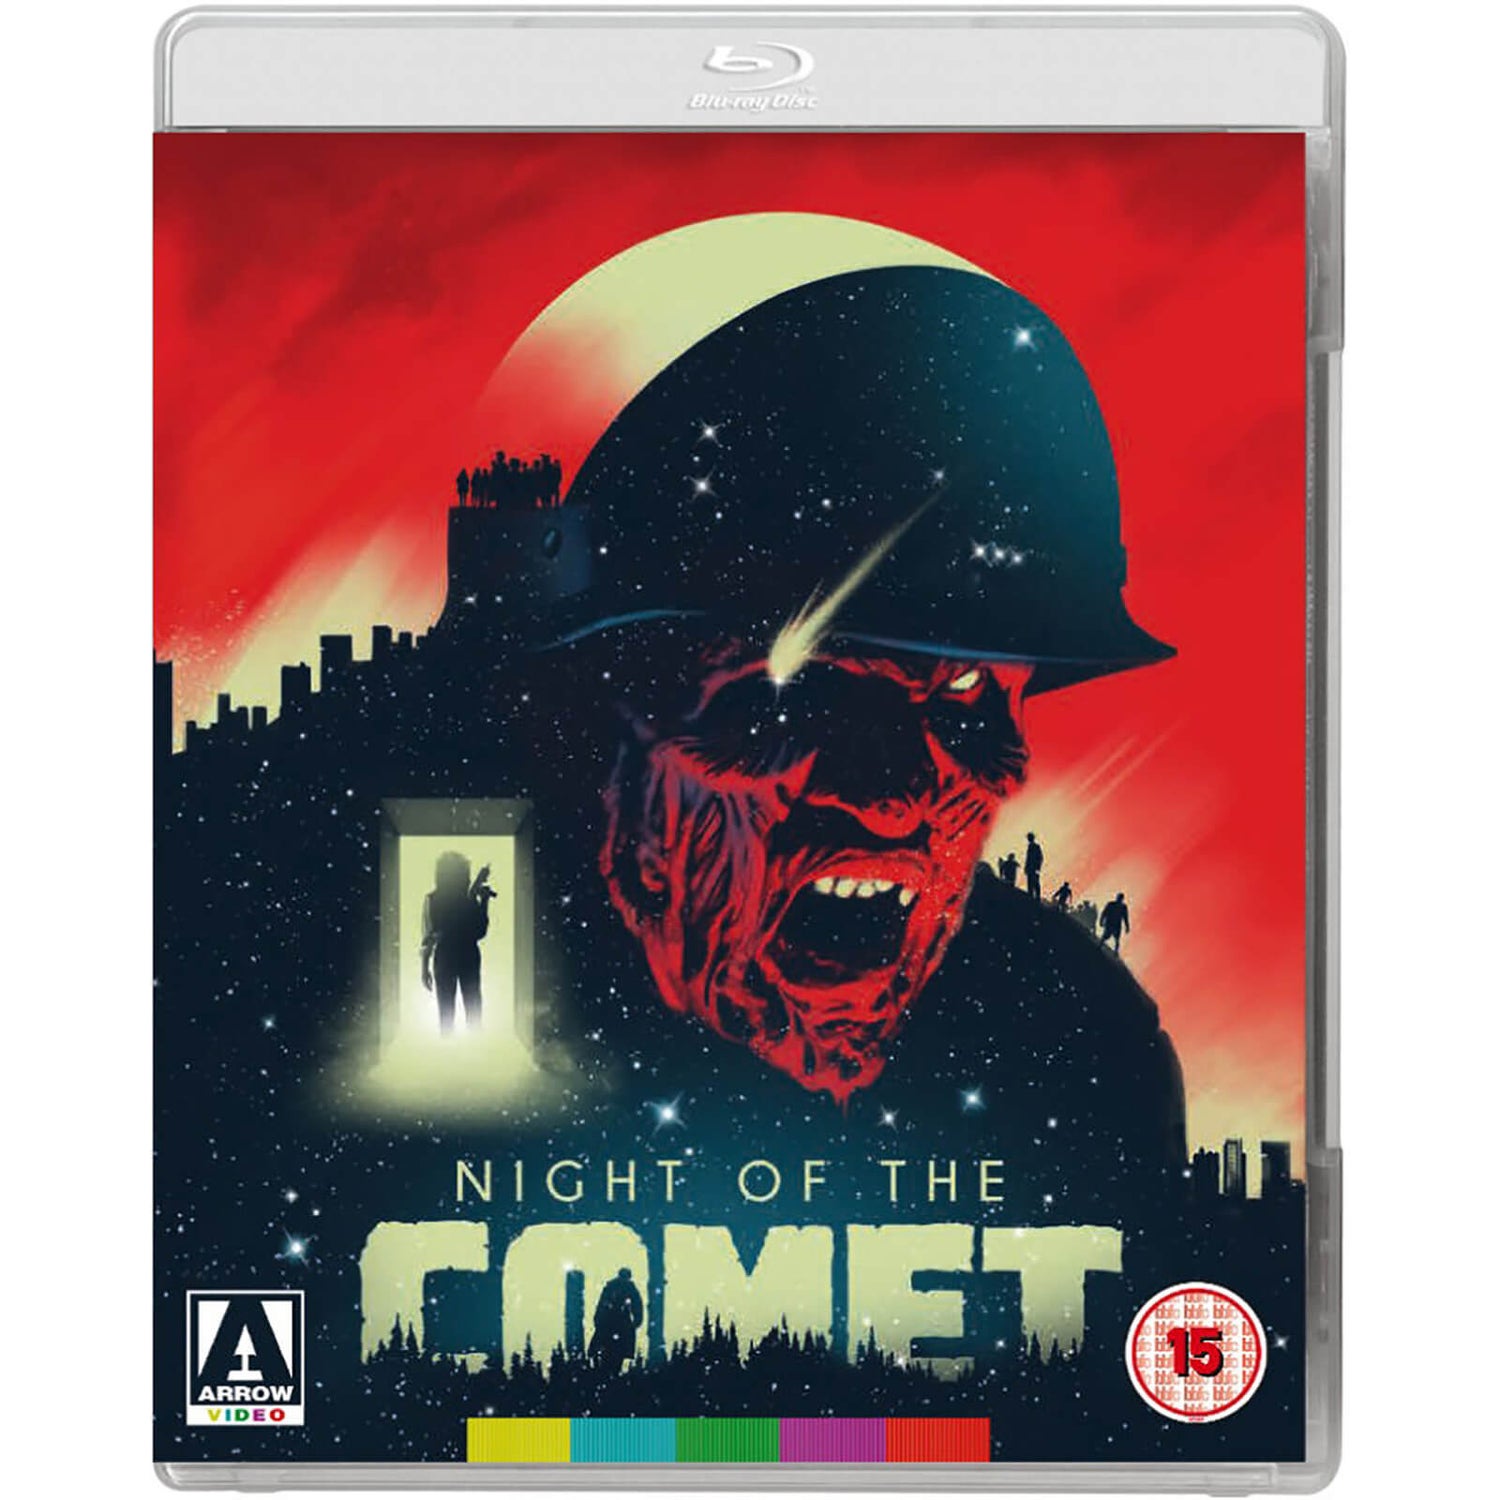 Night of the Comet (Includes DVD)